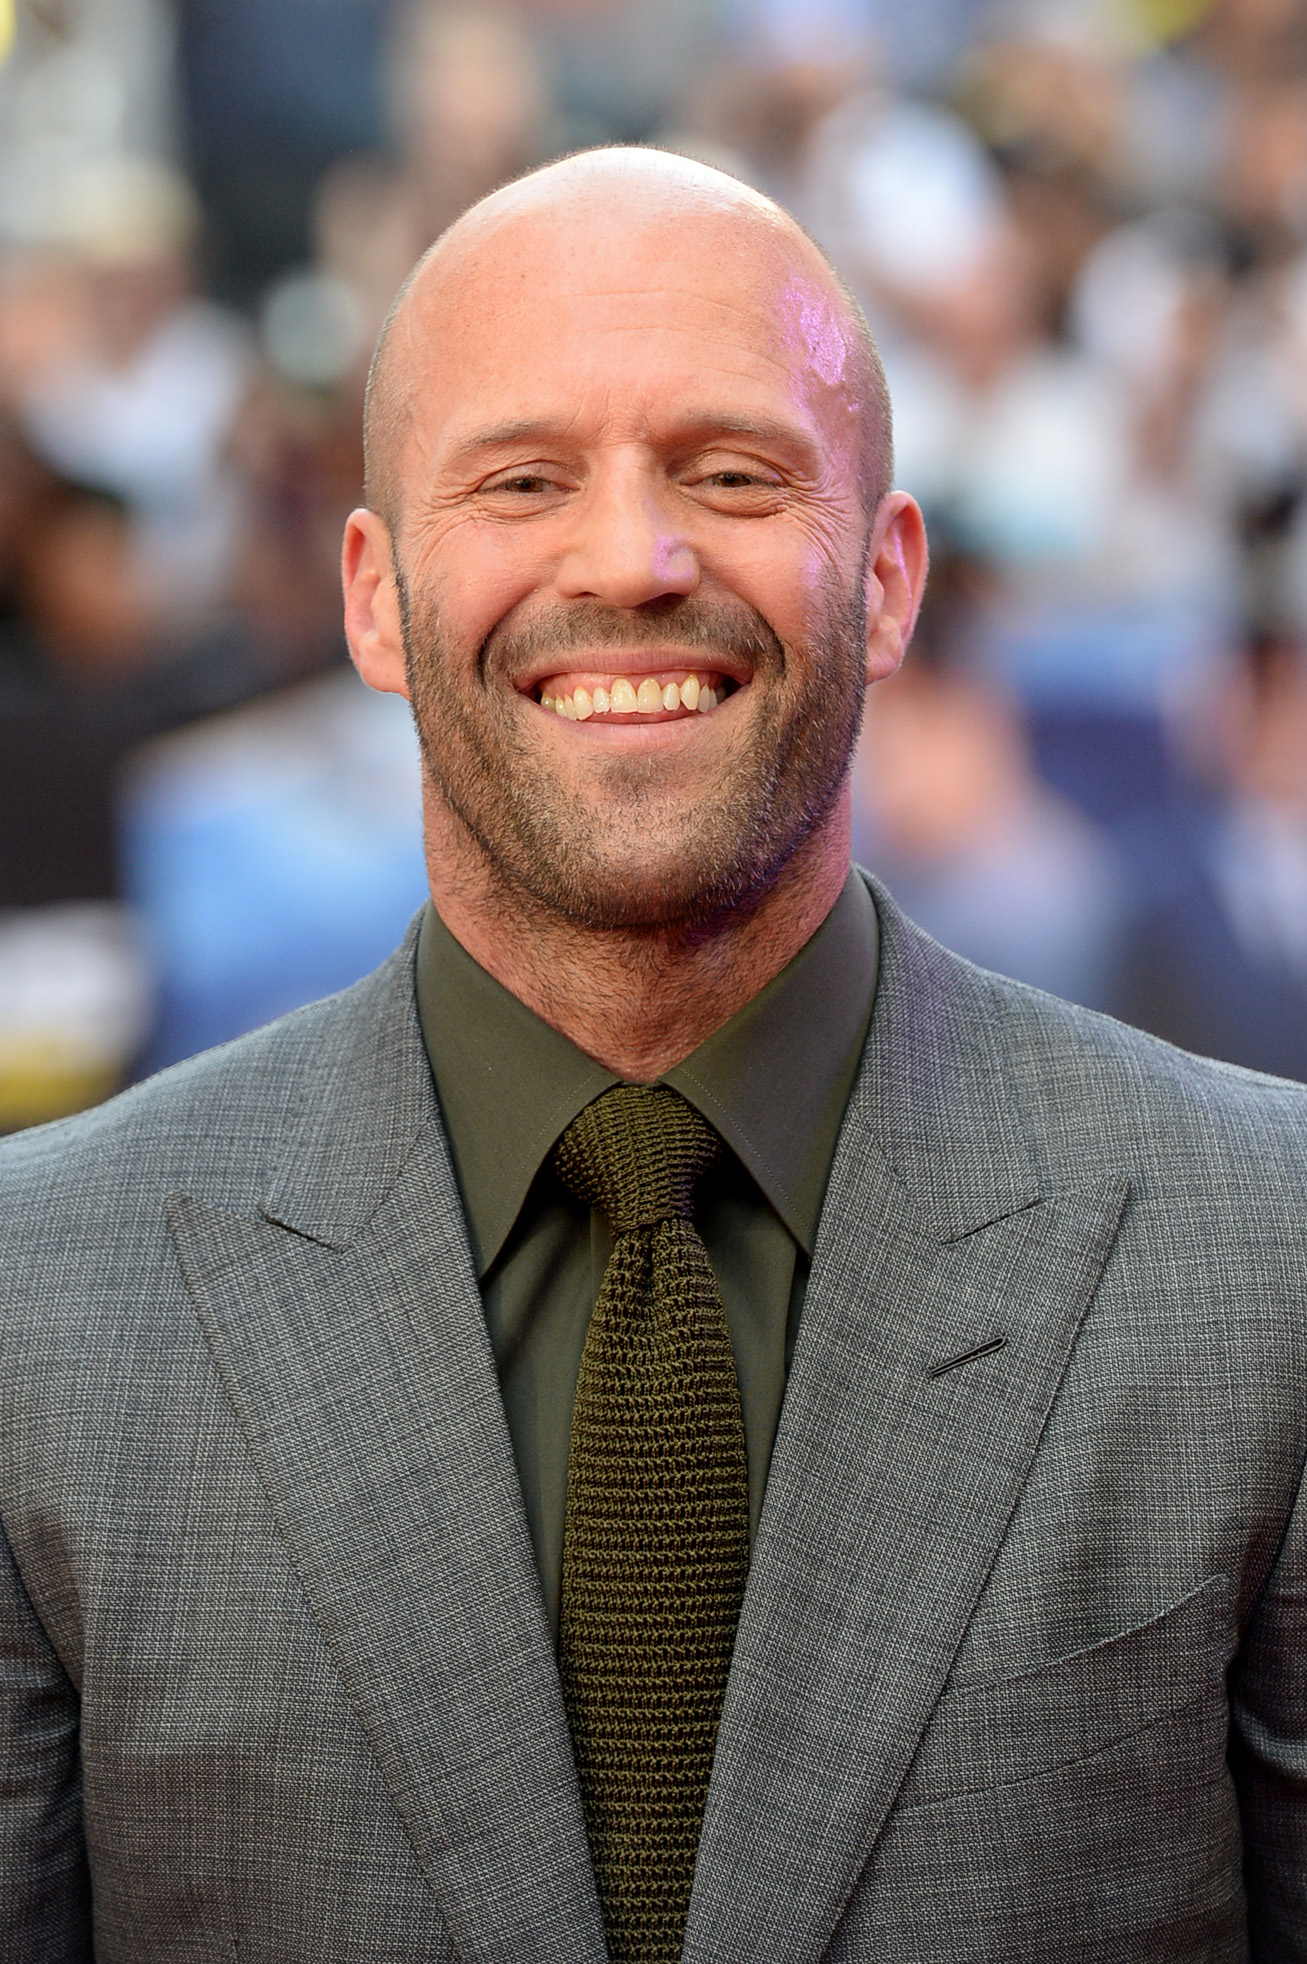 Jason Statham attends the "Fast & Furious: Hobbs & Shaw" special screening on July 23, 2019 in London, England | Source: Getty Images